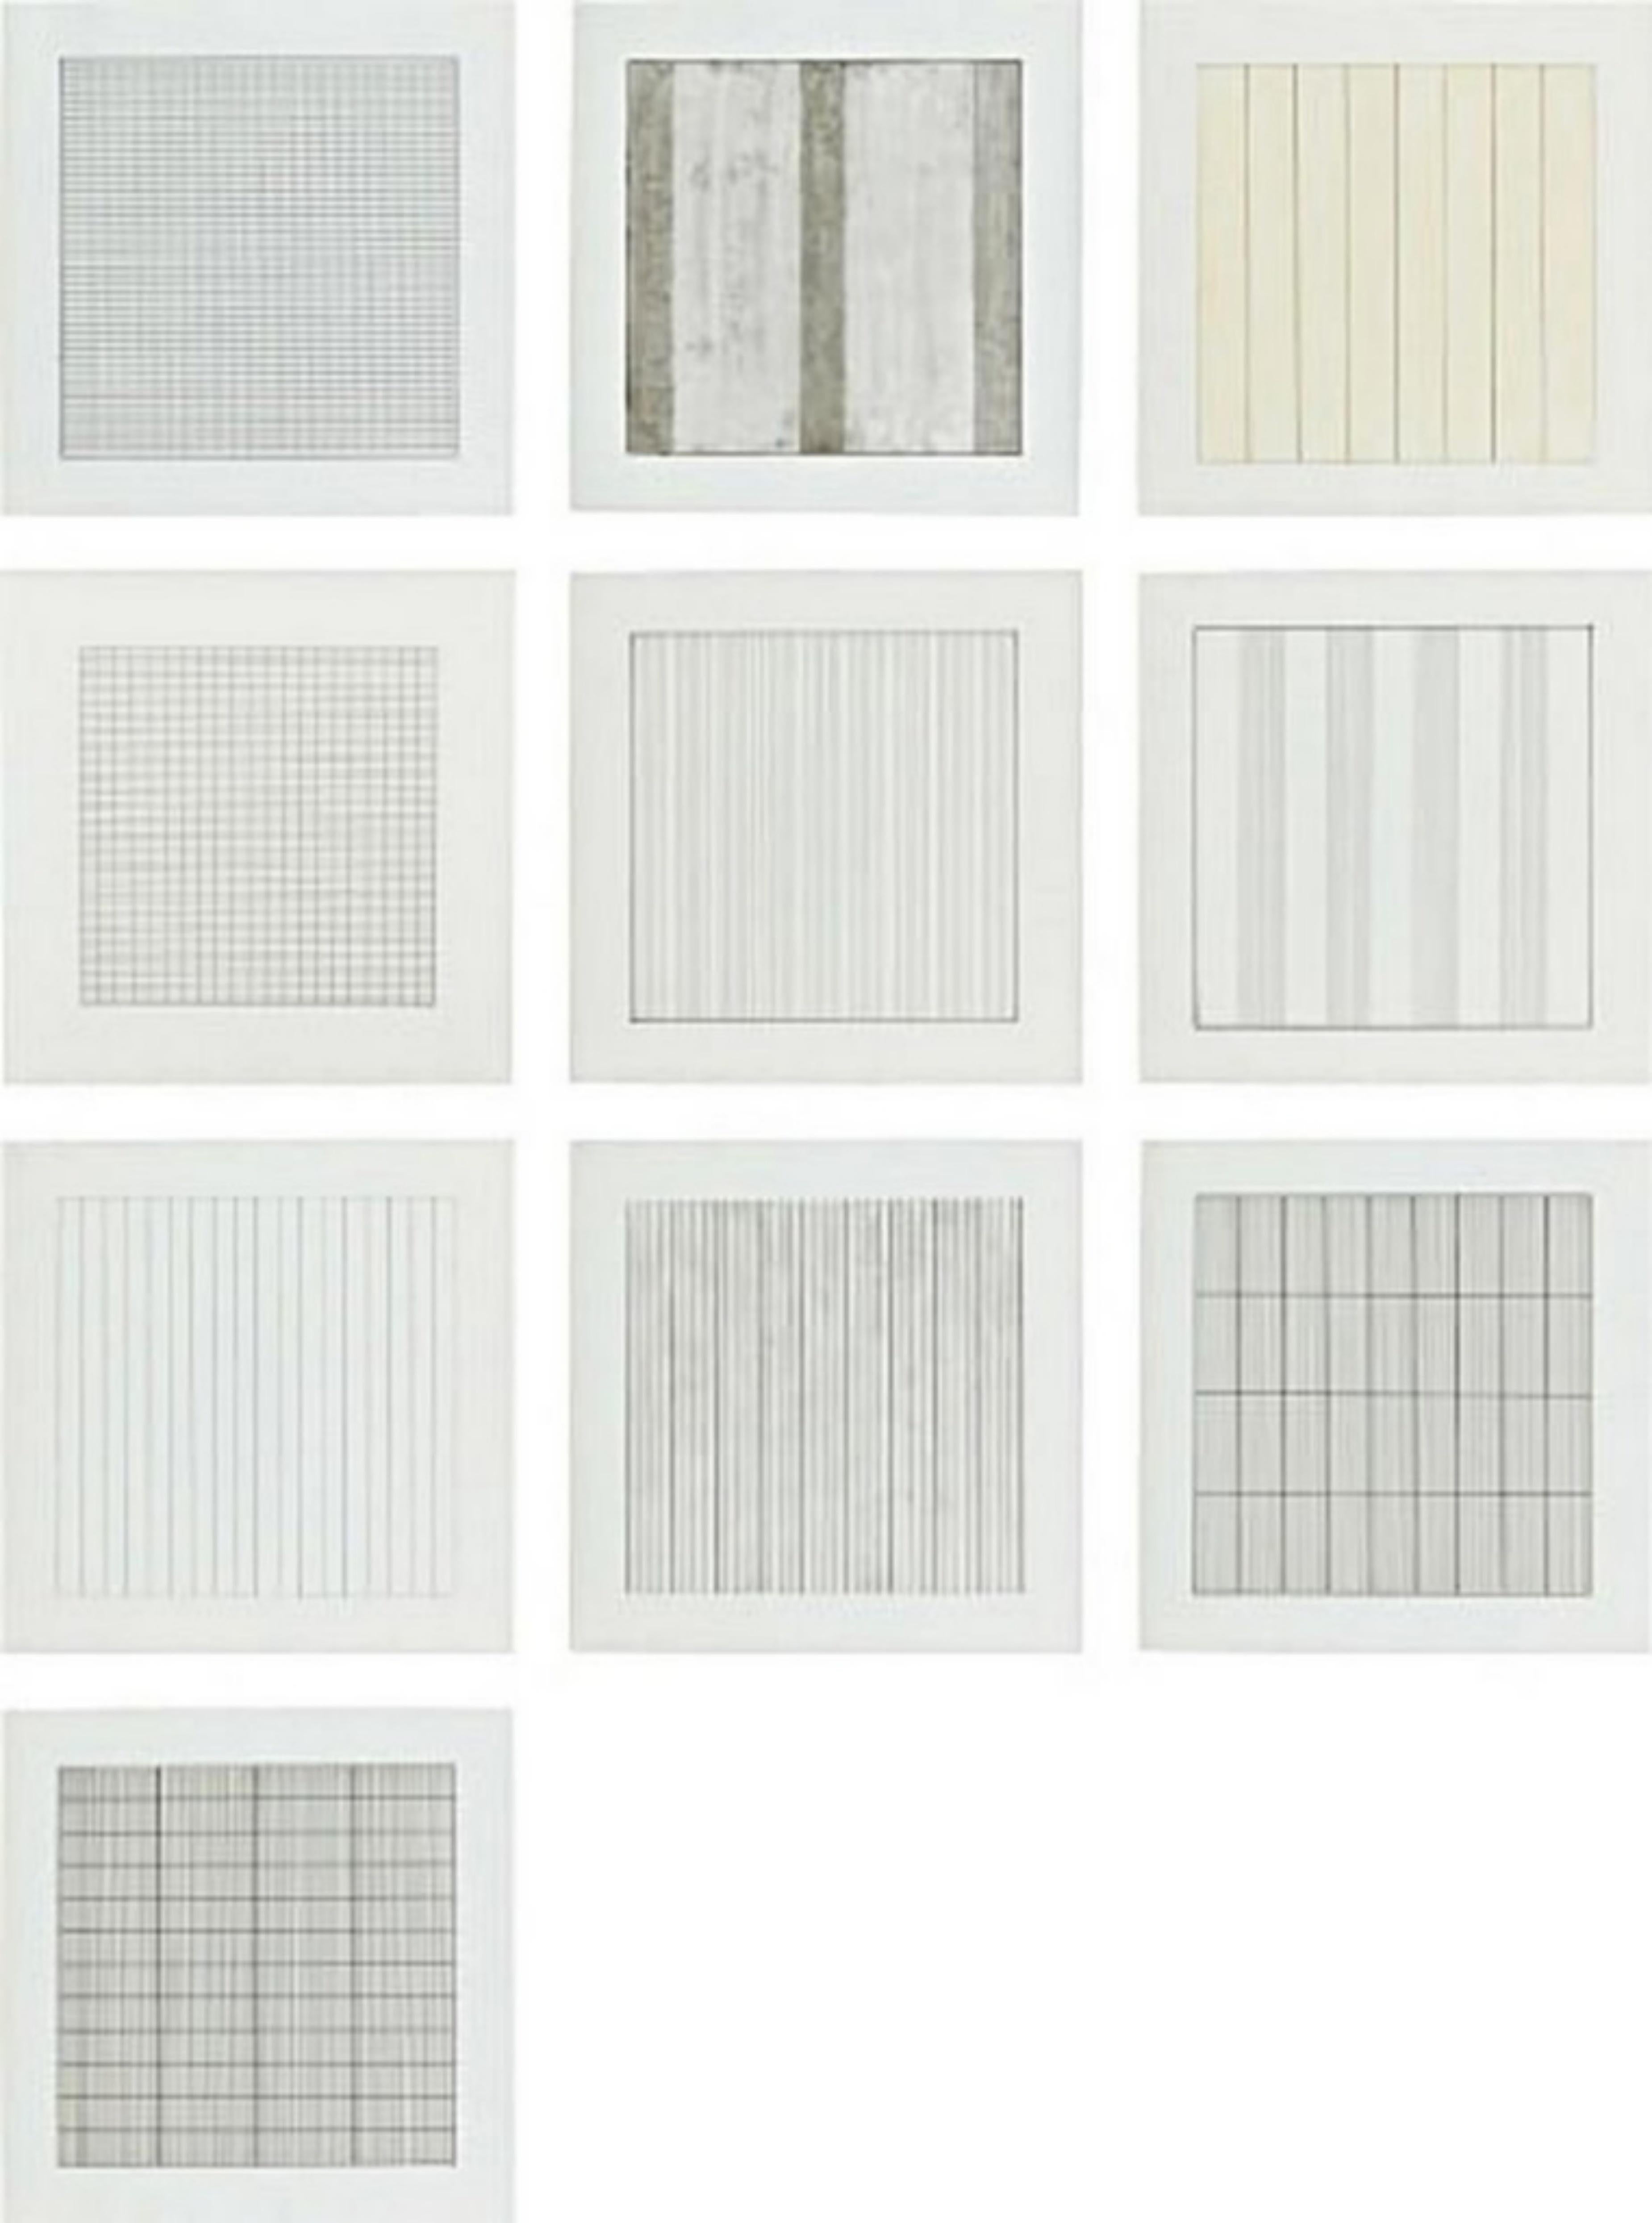 Paintings and Drawings: Suite of 10 Separate (Individual) lithographs on vellum  - Print by Agnes Martin